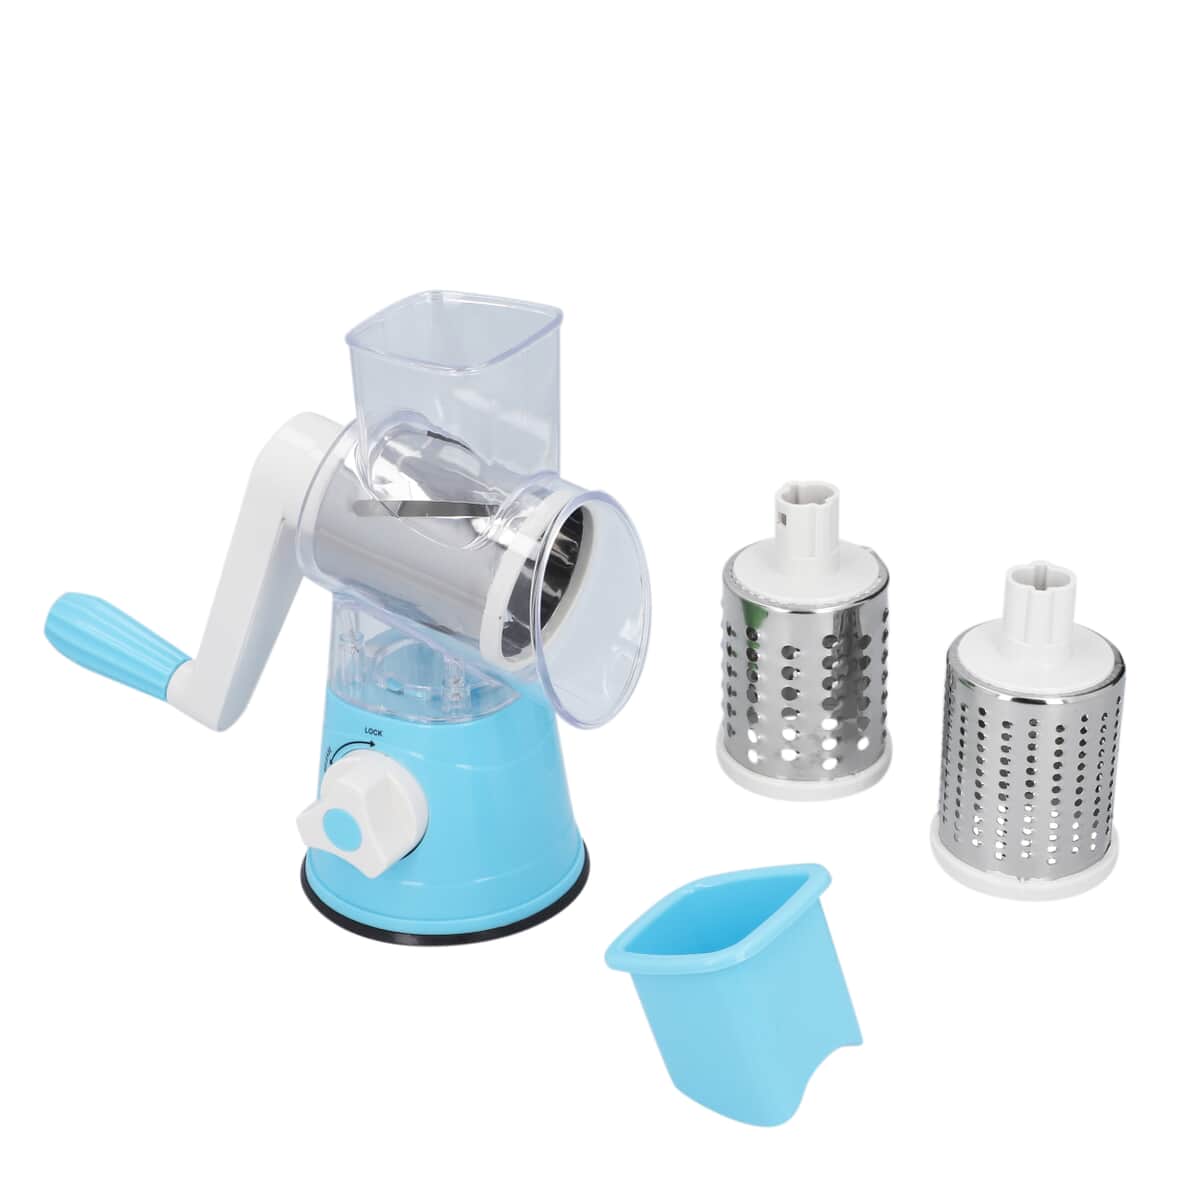 HOMESMART Blue - Vegetable and Fruit Slicer with Interchangeable Stainless Steel Drum Blades (9.84"x9.06") image number 1